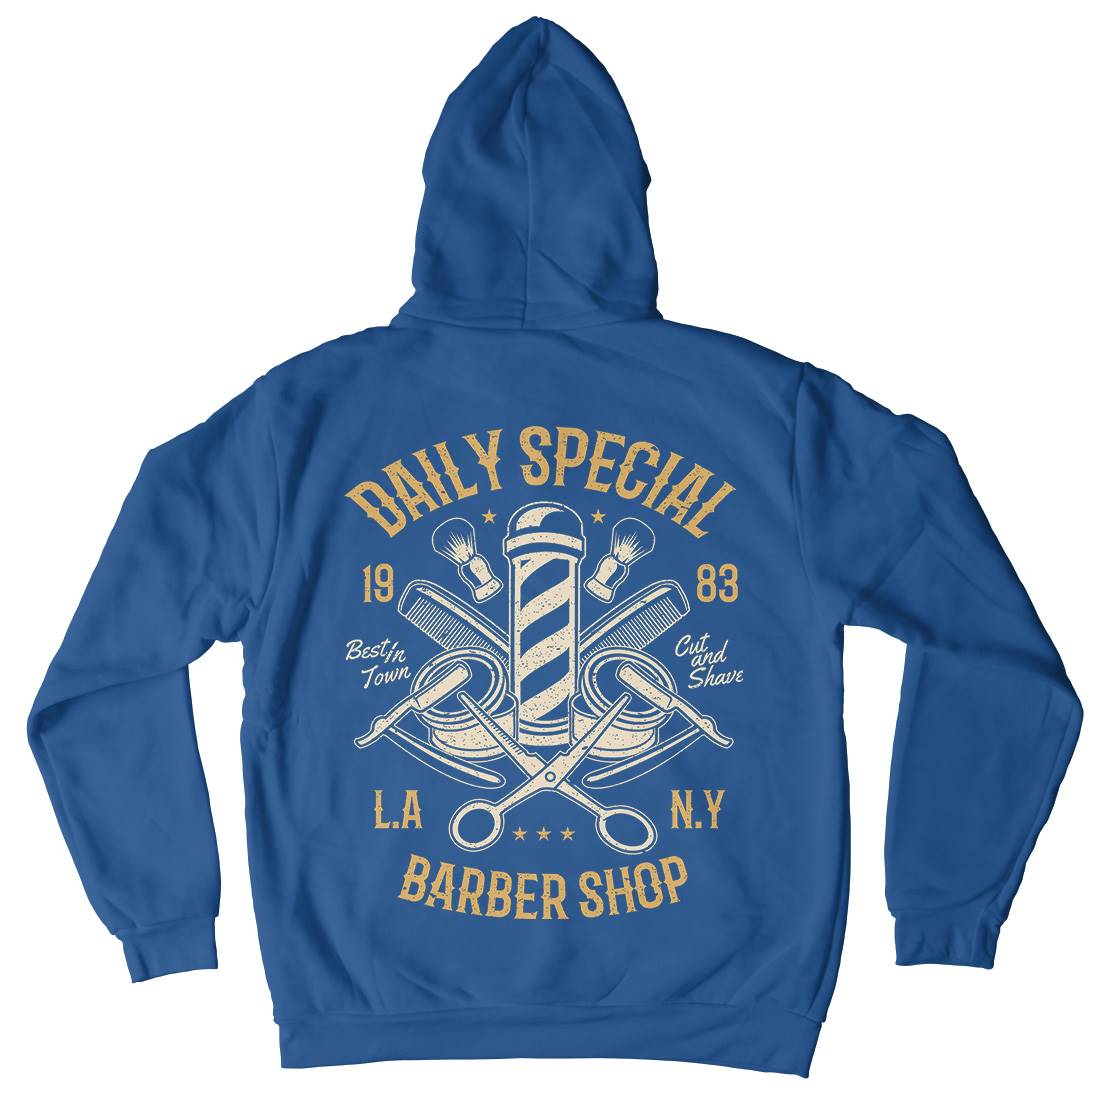 Daily Special Shop Kids Crew Neck Hoodie Barber A041